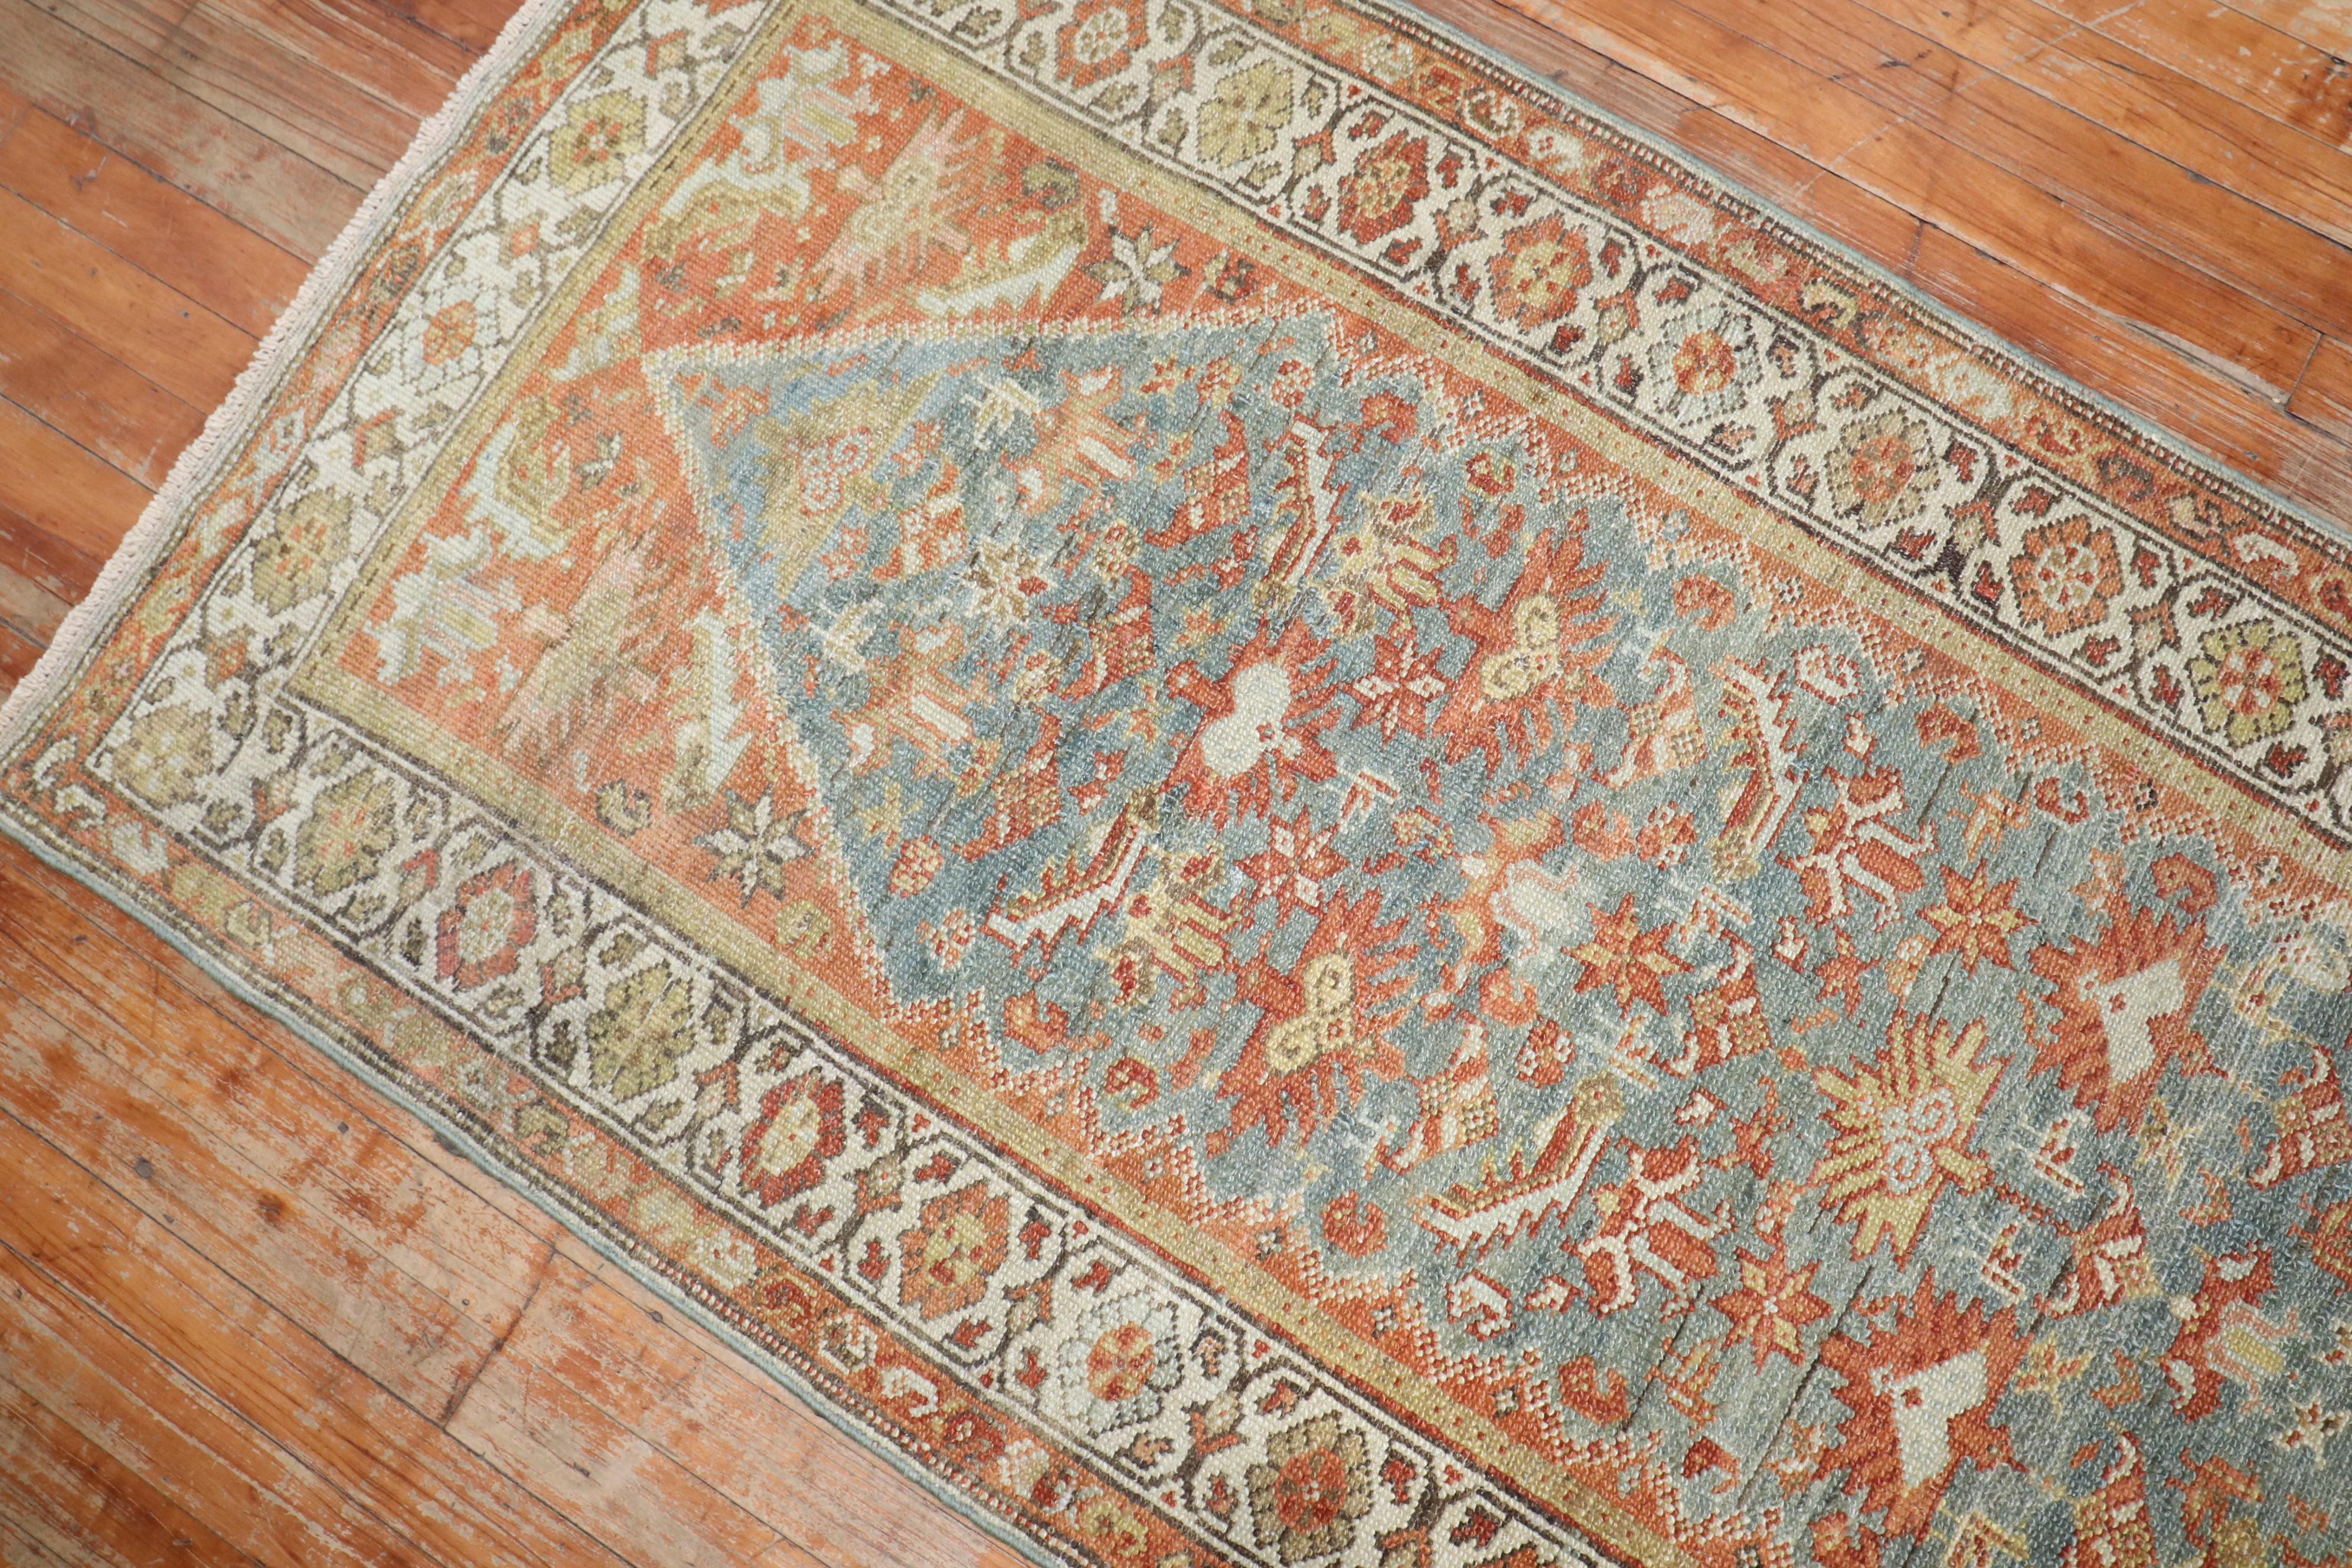 A pair of warm color Persian Malayers from the early 20th Century

Measure: 2'10'' x 12'10'' and 2'11'' x 12'10'' respectively.

